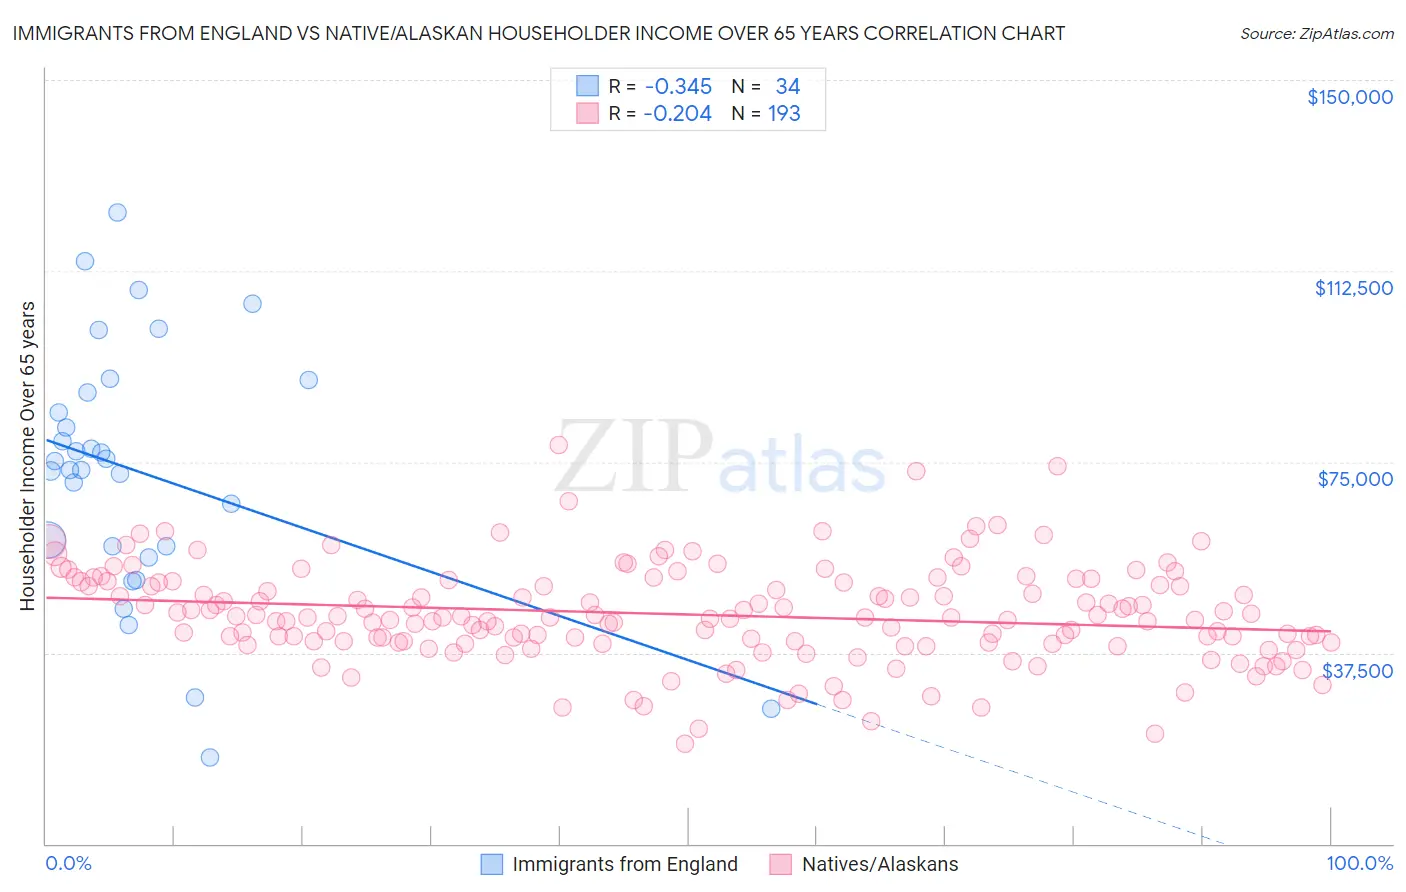 Immigrants from England vs Native/Alaskan Householder Income Over 65 years